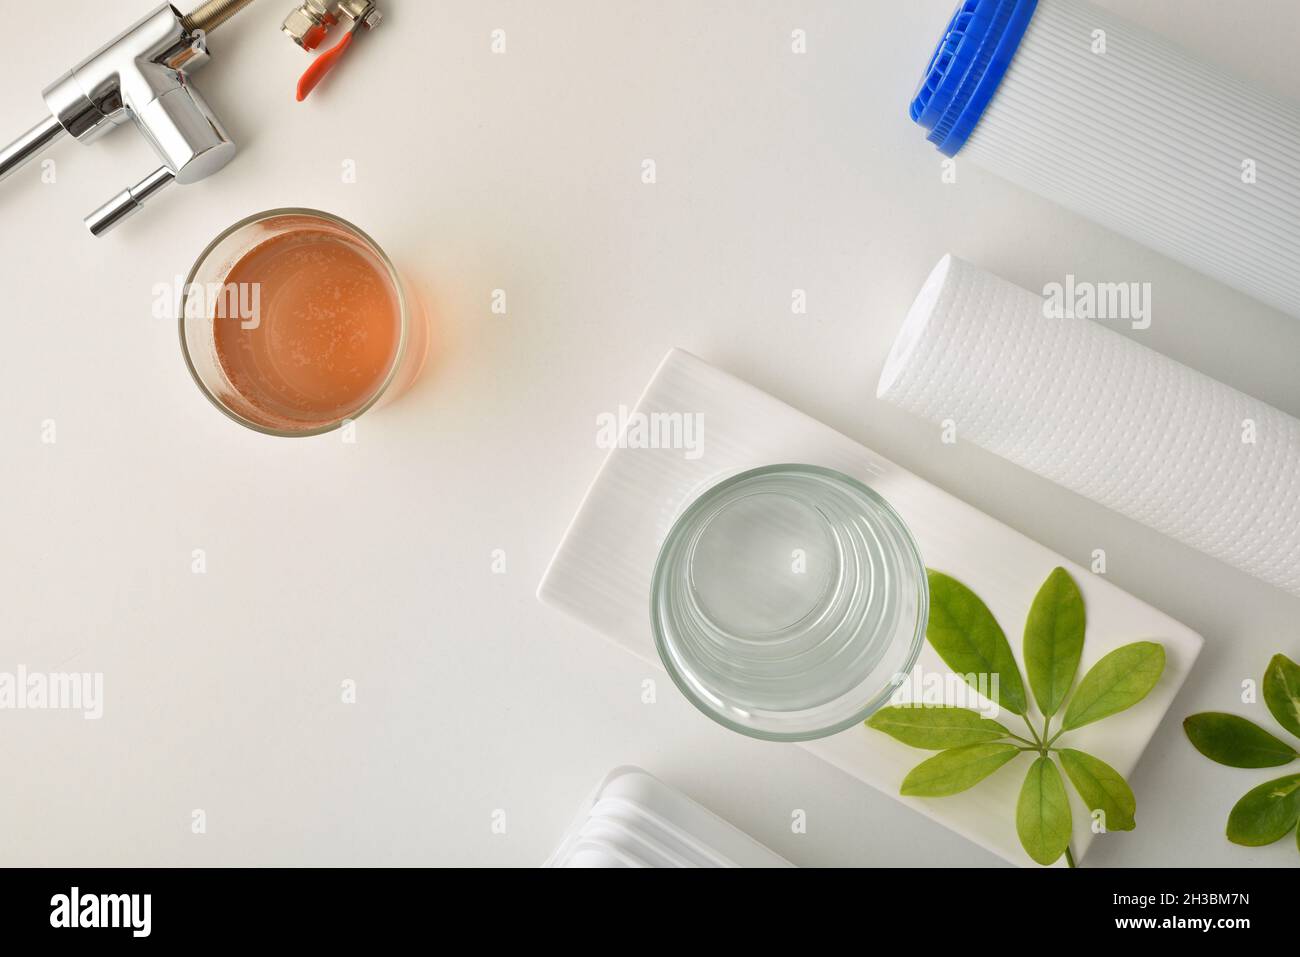 Comparison of dirty water and filtered by osmosis in glasses on a kitchen bench with filter and equipment. Top view. Horizontal composition. Stock Photo